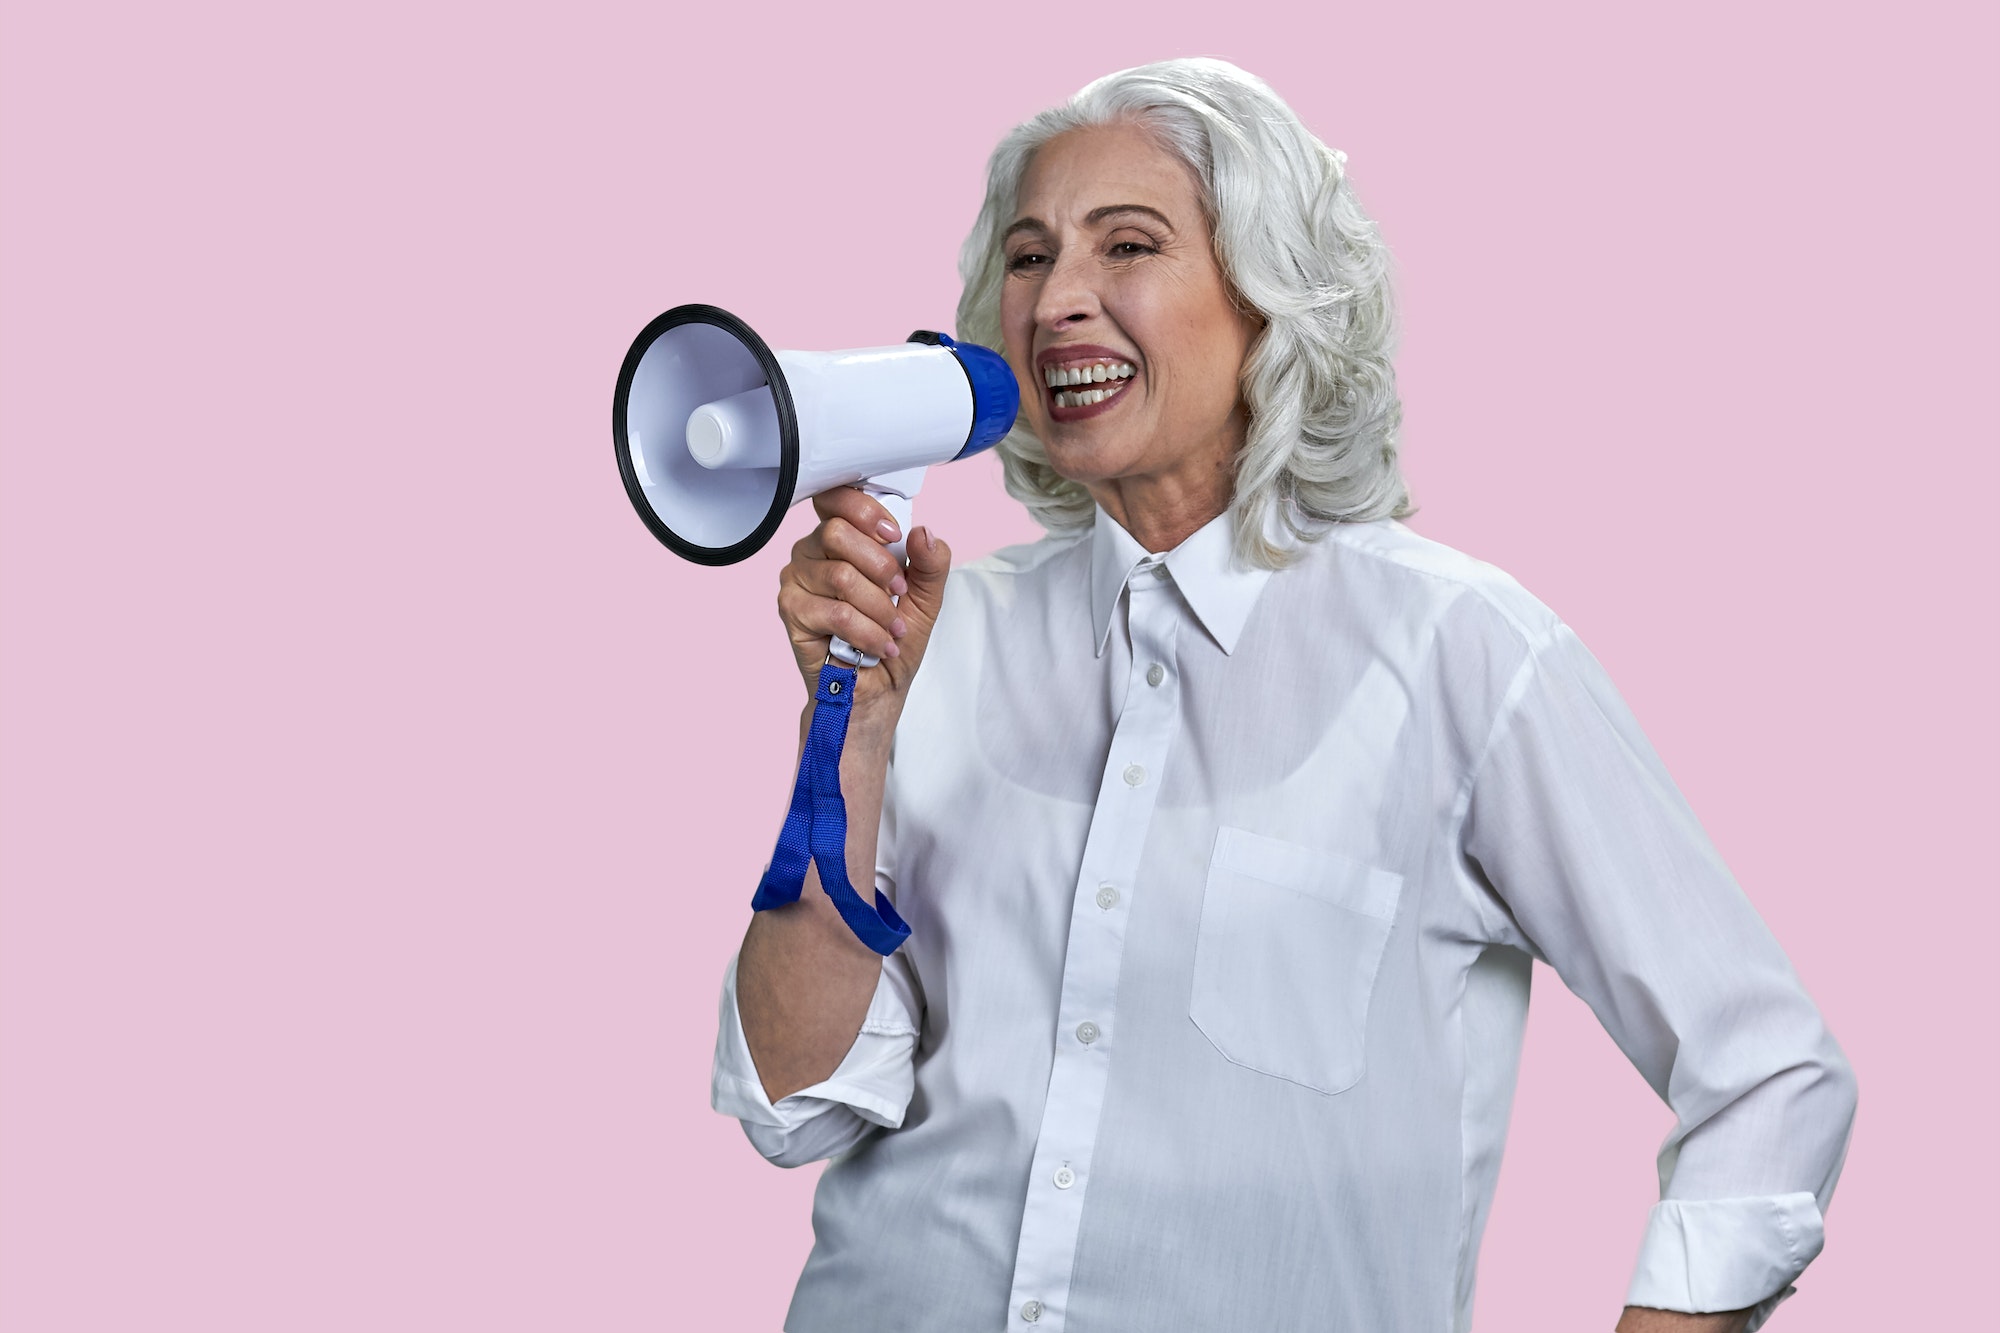 Portrait of laughing senior woman with megaphone.